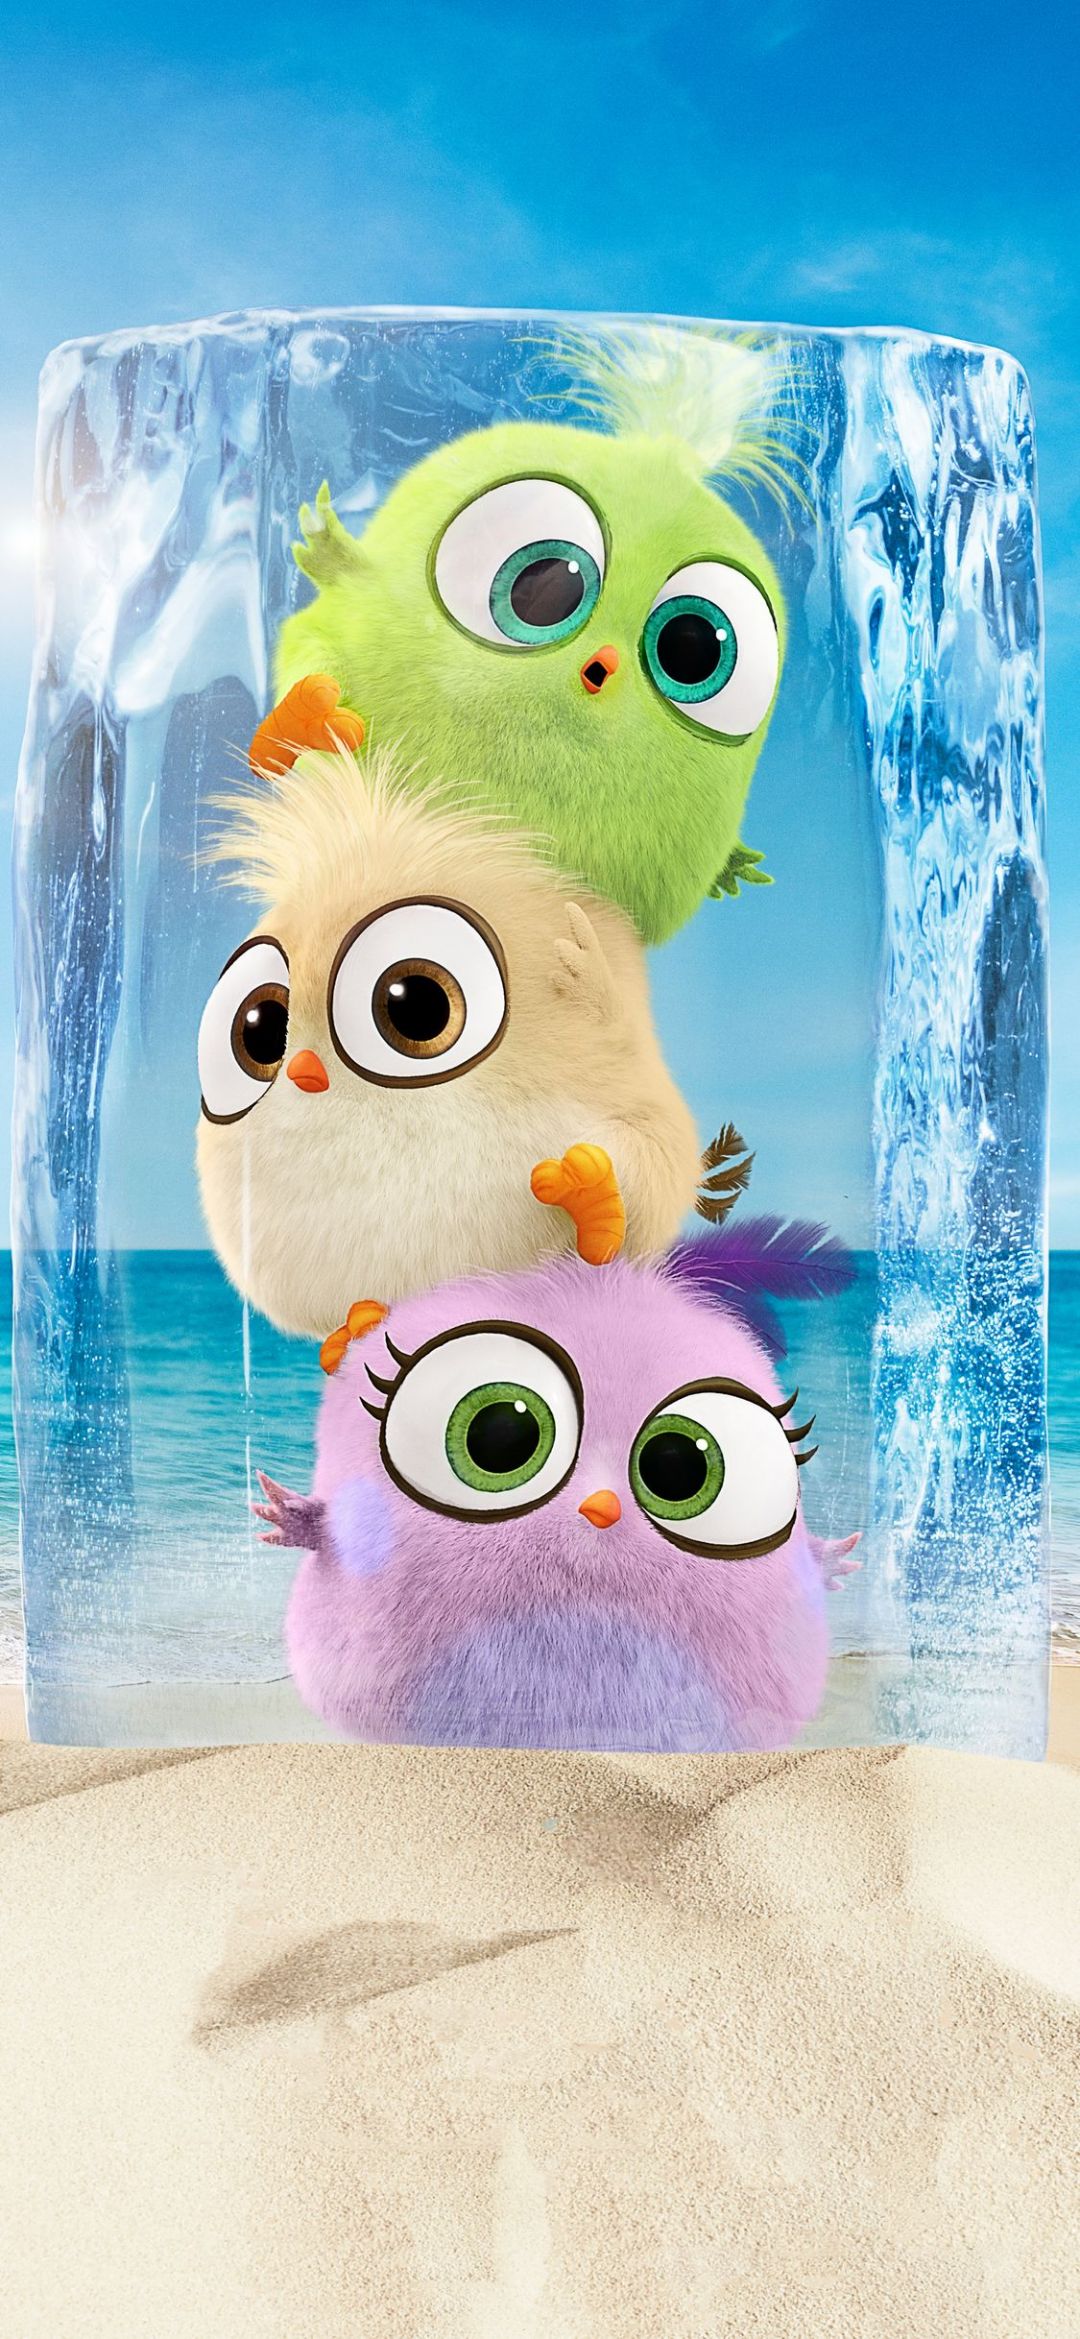 ✓[95+] Hatchlings In The Angry Birds Movie 2 iPhone XS - Android / iPhone  HD Wallpaper Background Download (png / jpg) (2023)